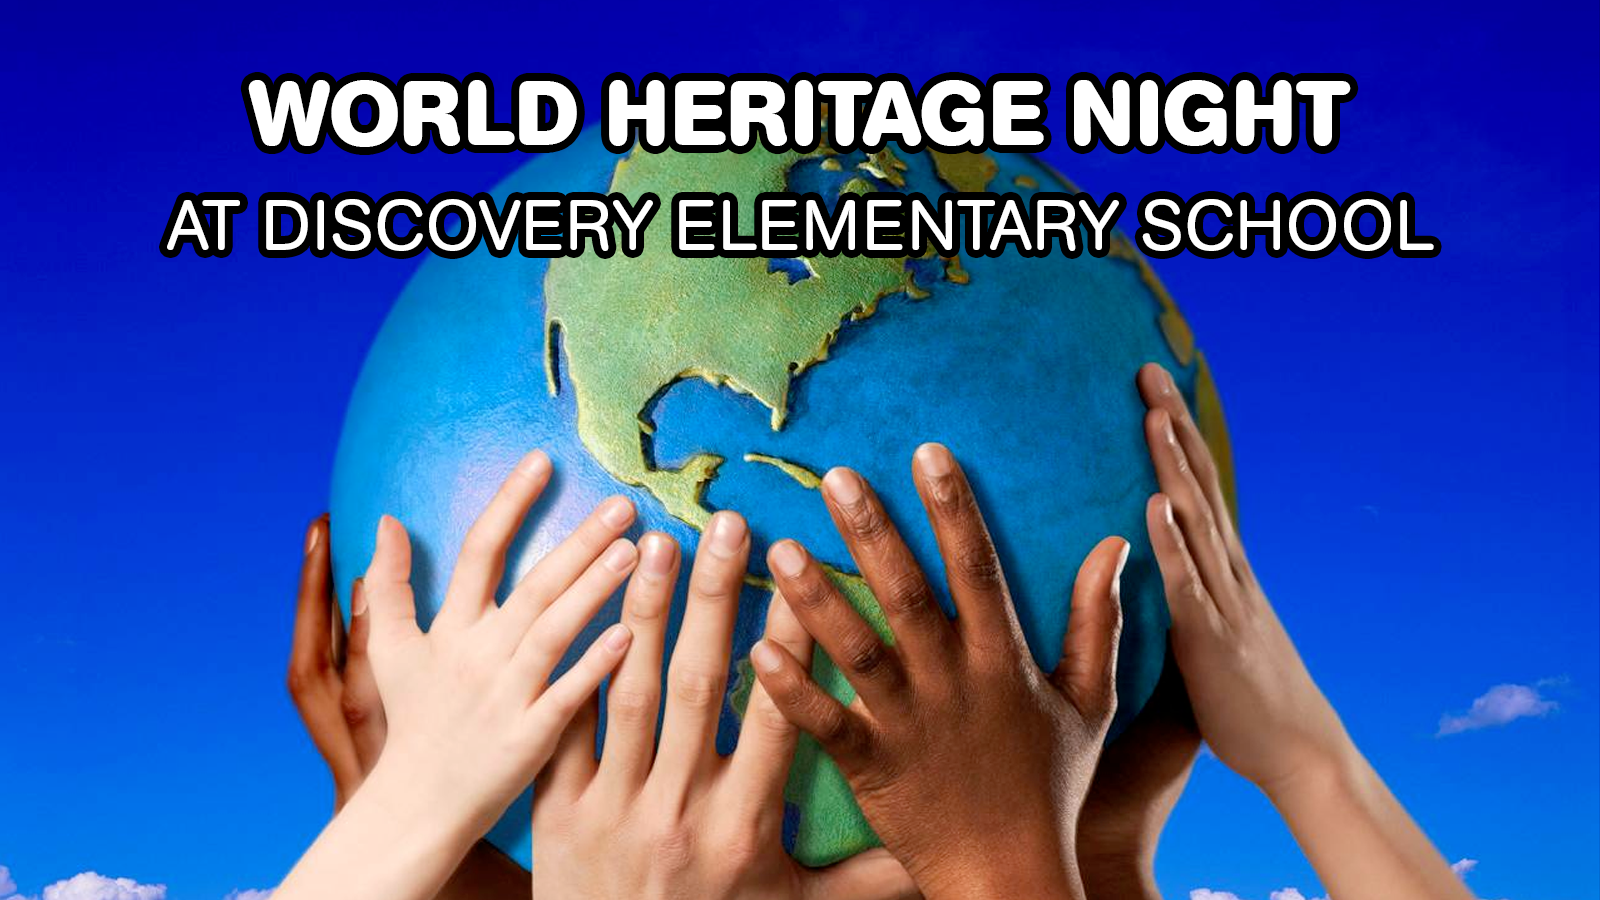 The many-colored hands of children all holding up a globe of the Earth, and the words "World Heritage Night at Discovery Elementary School"